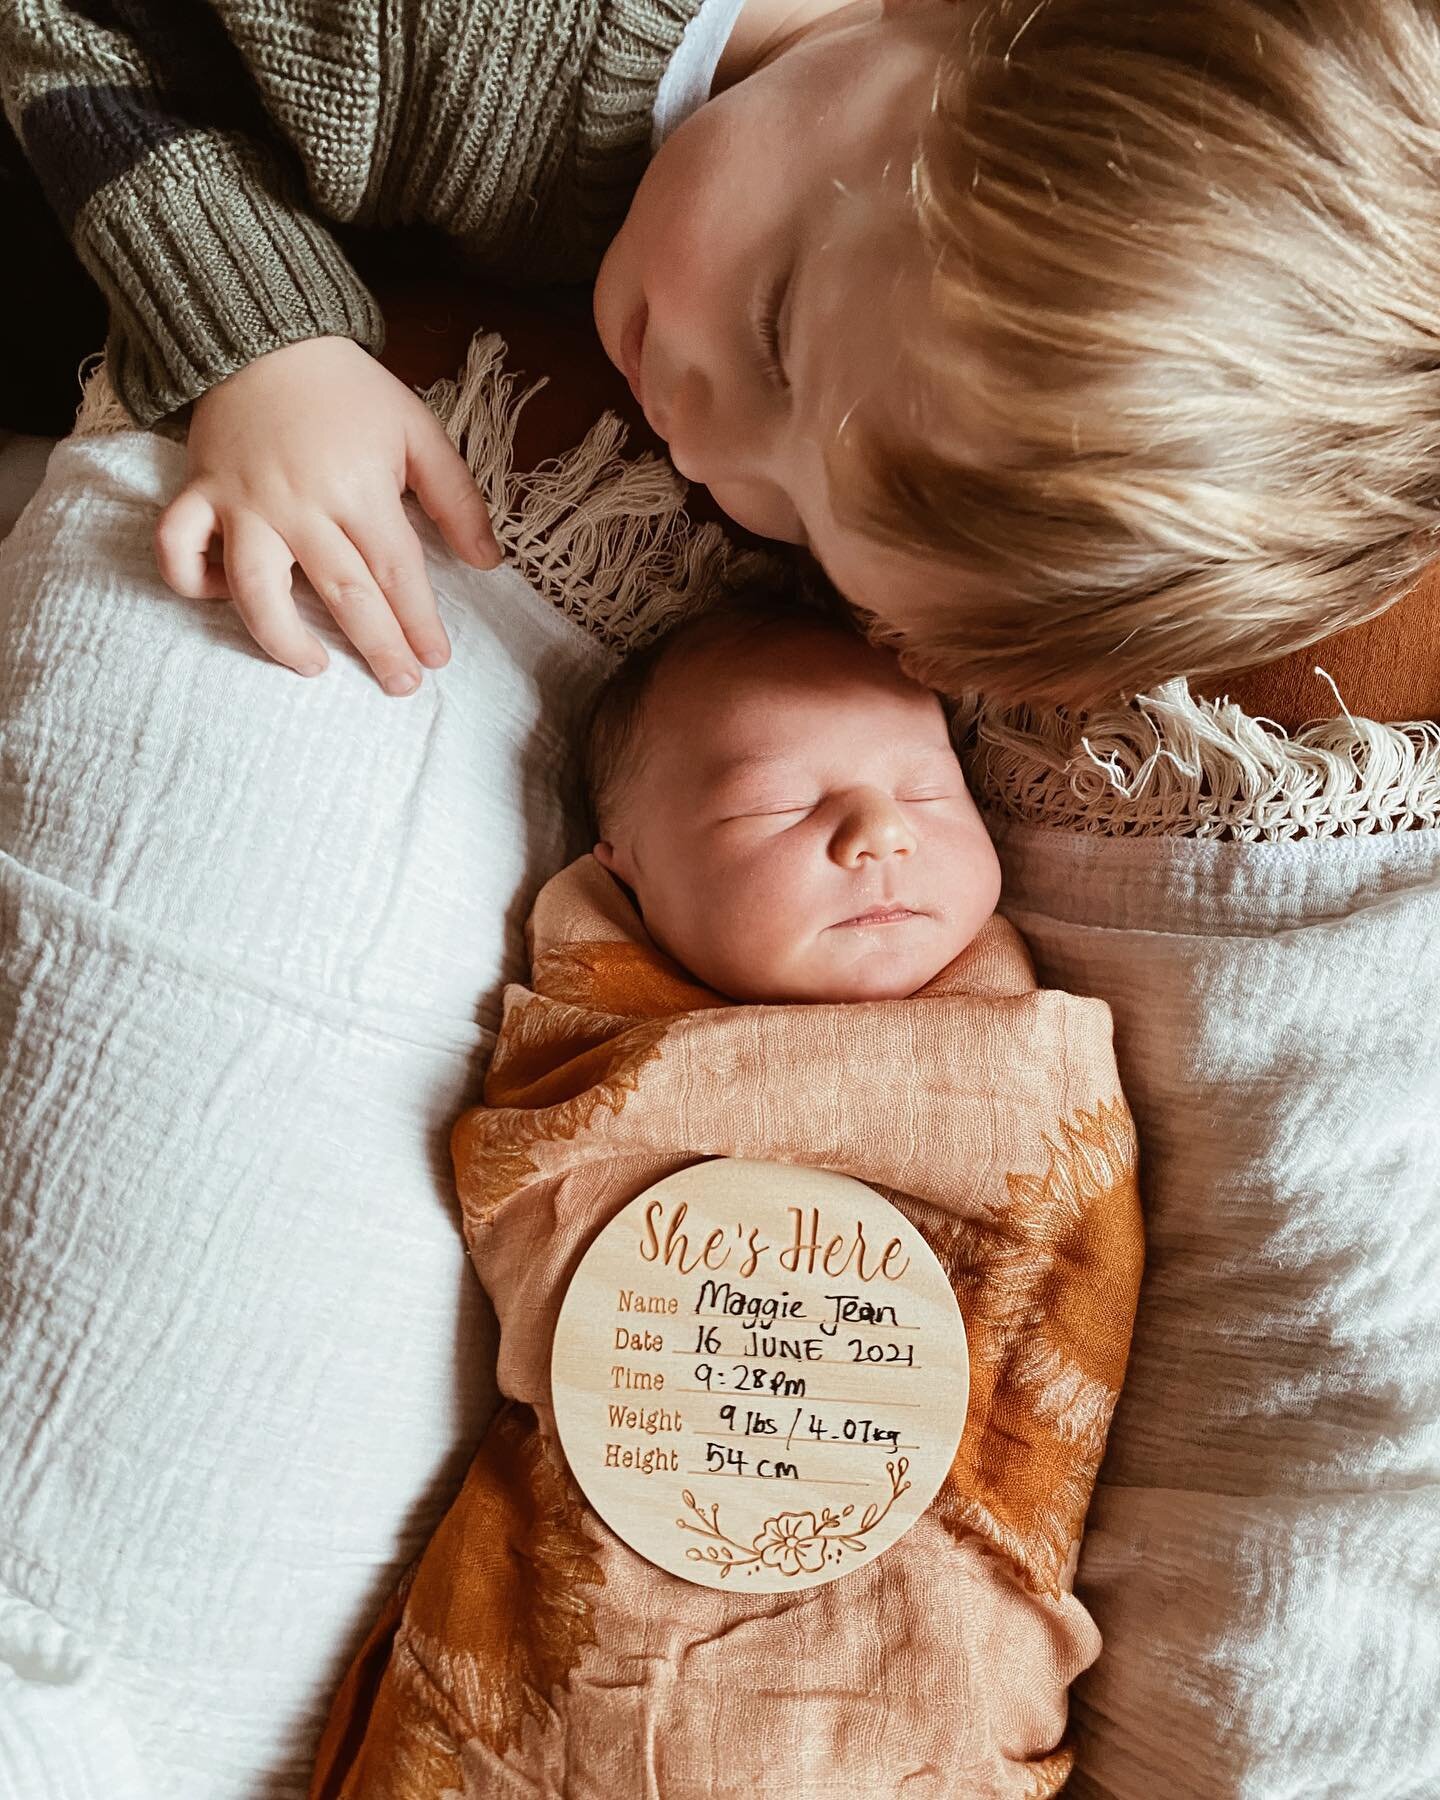 She&rsquo;s here 🧡 arriving fashionably late at 9:28pm on June 16 (12 days post date) our hearts stretched to new sizes for our baby girl Maggie Jean. Despite leaving us waiting on her arrival, she arrived fairly quickly once labour finally began. W